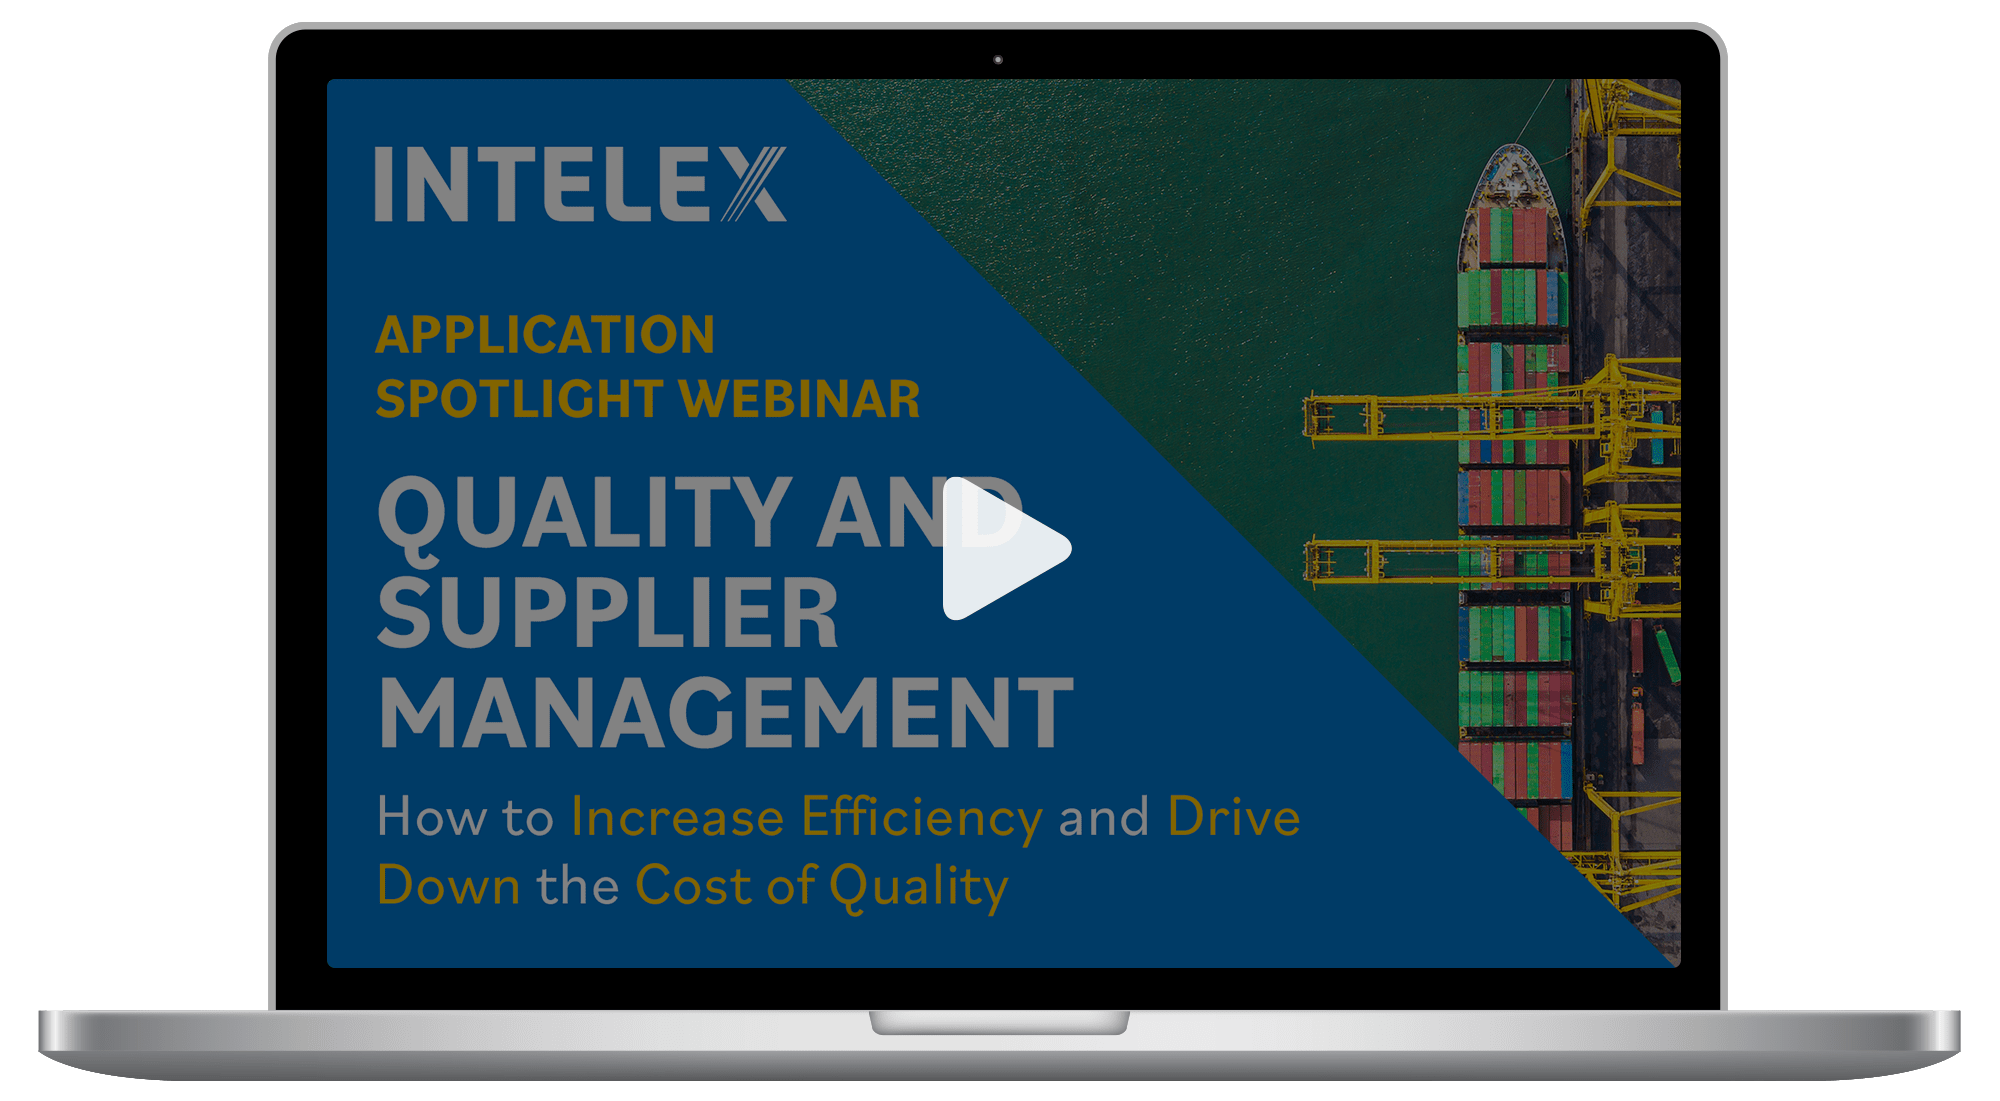 Quality and Supplier Management Software Demo - Intelex